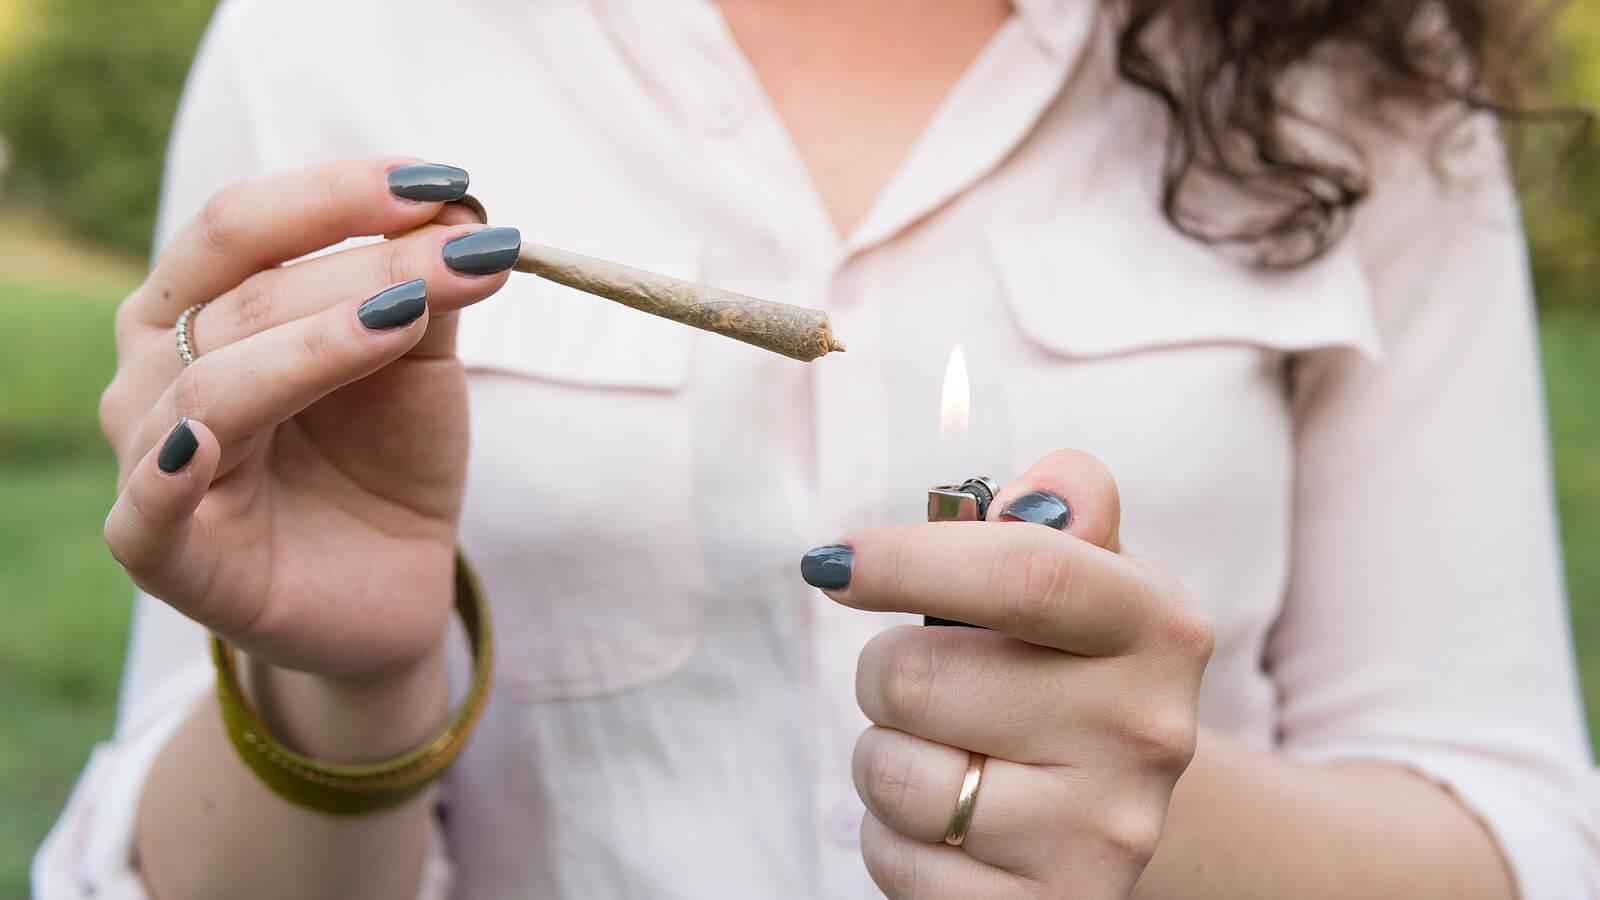 A teenager lighting a joint.